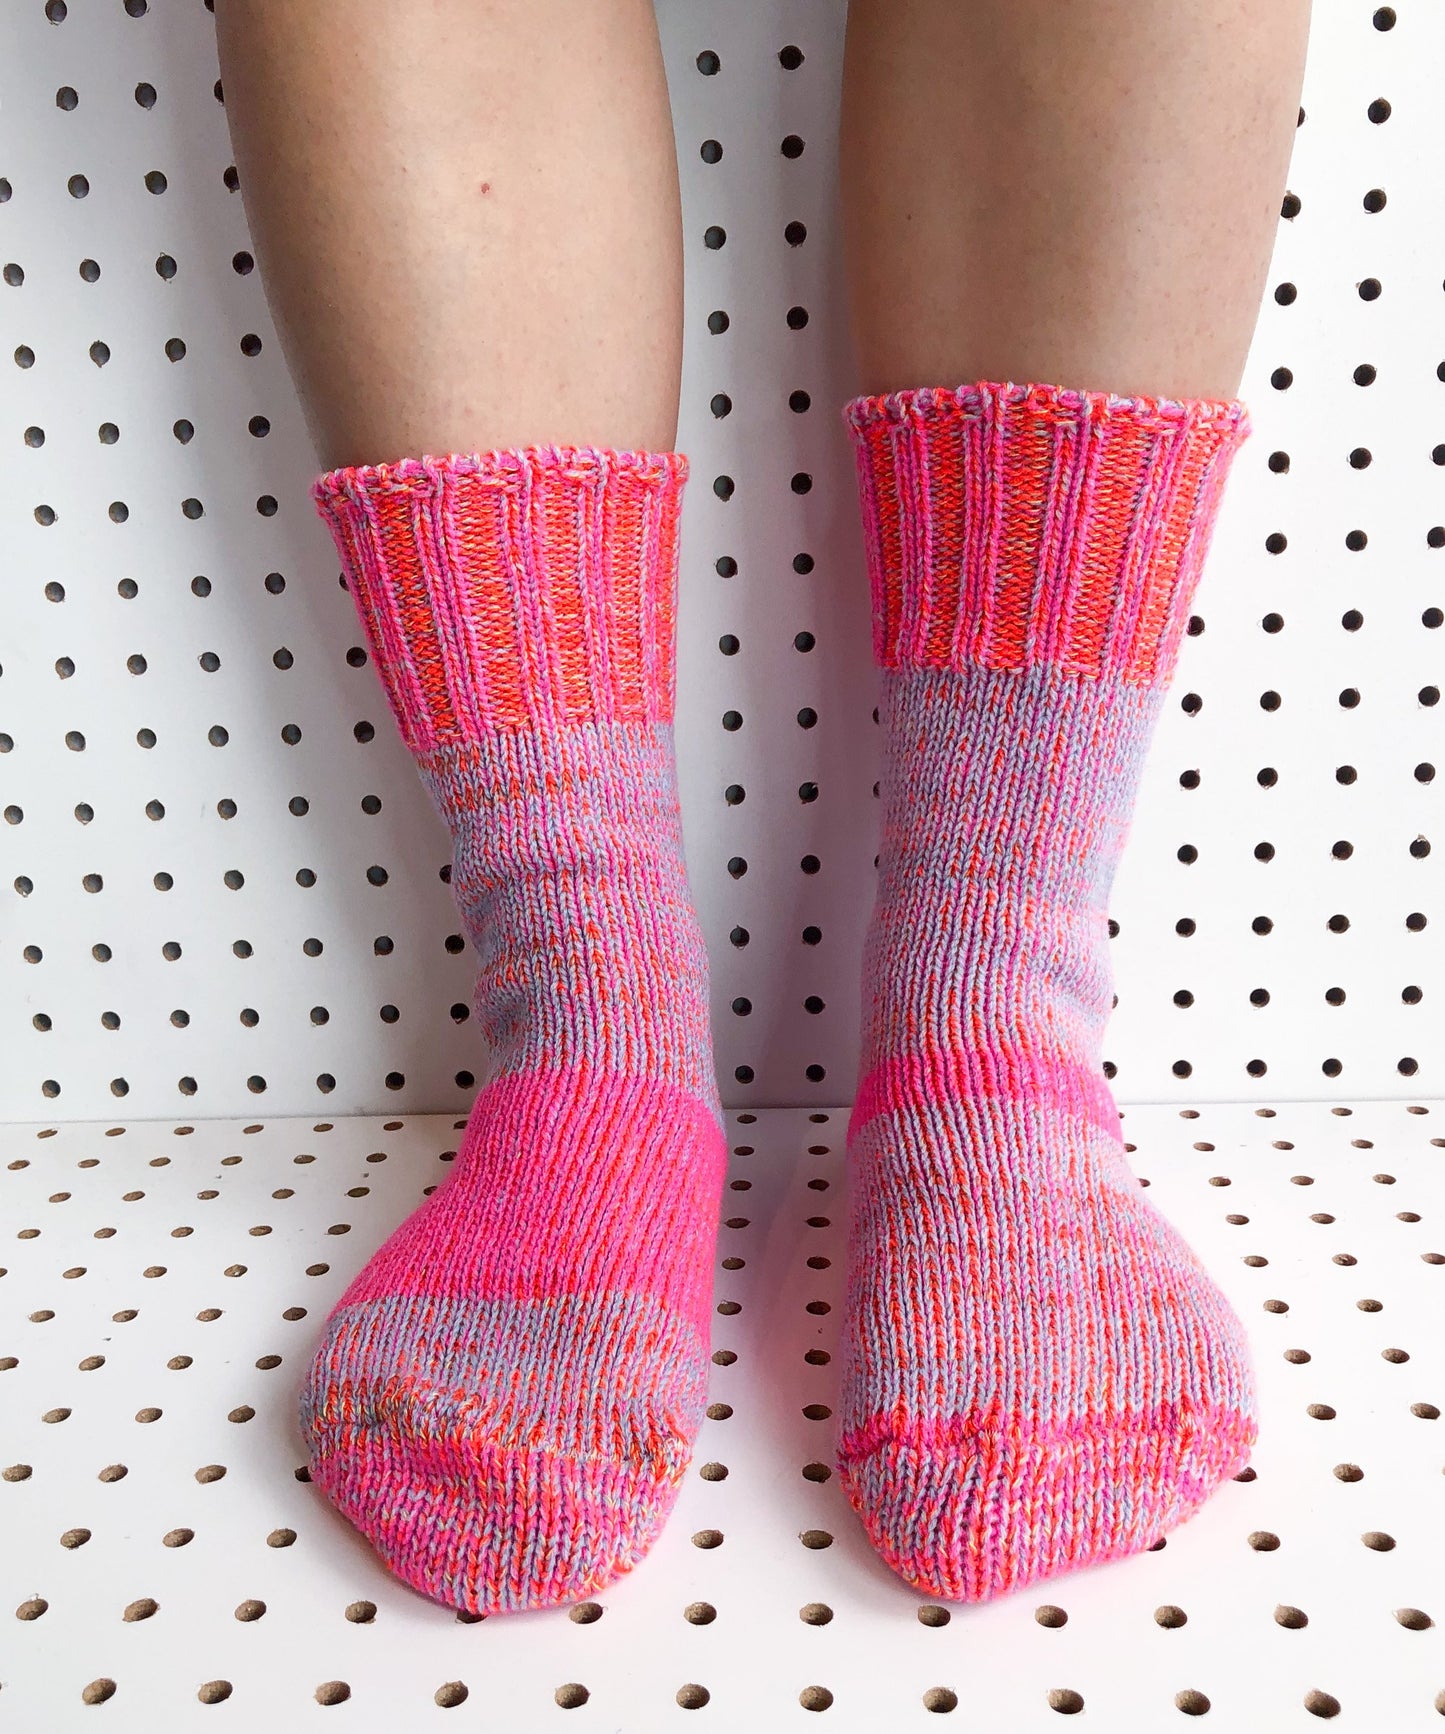 Sunday Socks In Cotton Candy By OkayOk